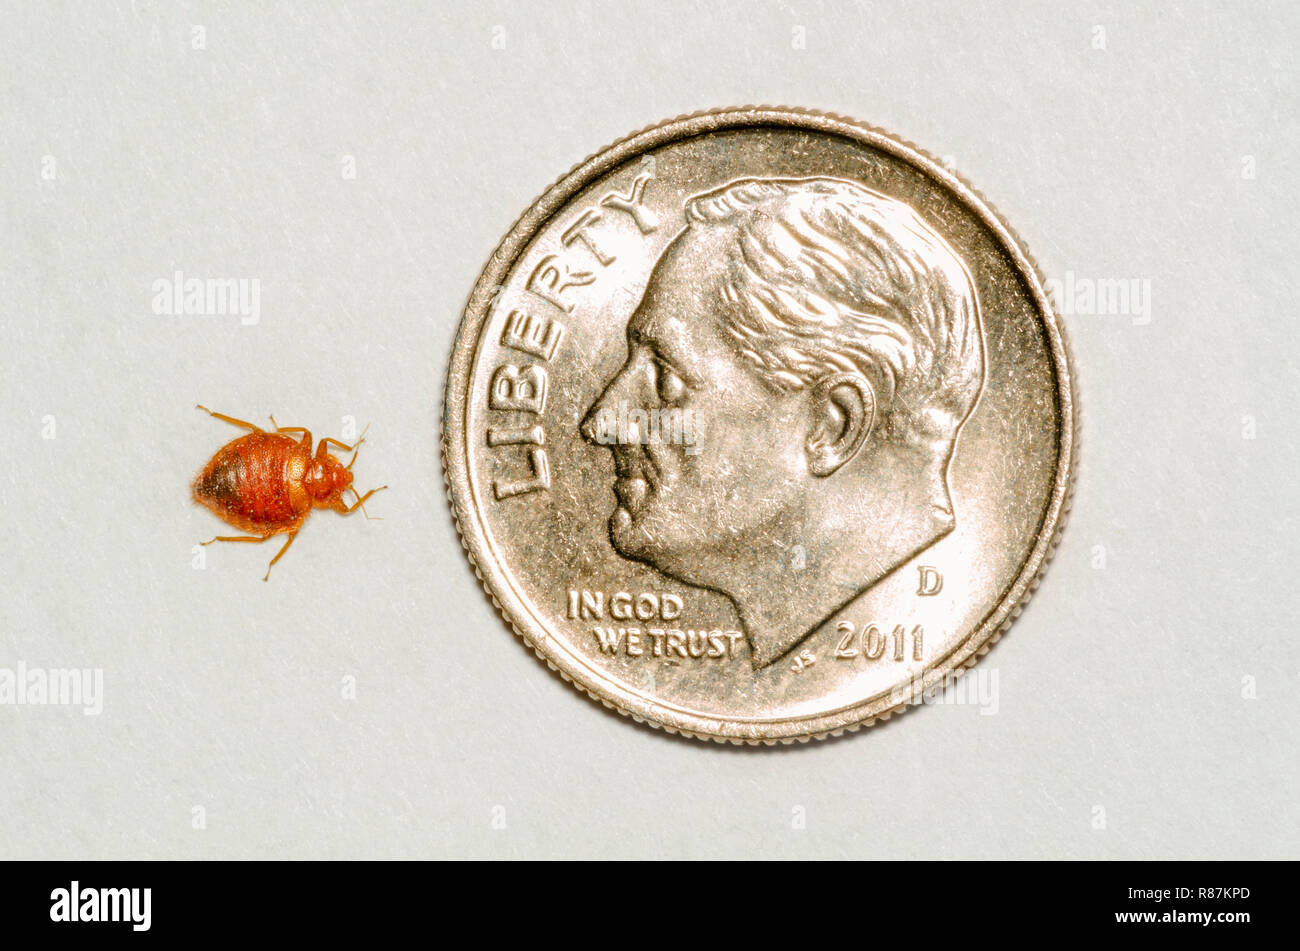 Common adult Bed bug- Bedbug (Cimex lectularius) compared to a US Roosevelt dime, showing how small they really are. Photo taken in May. Stock Photo